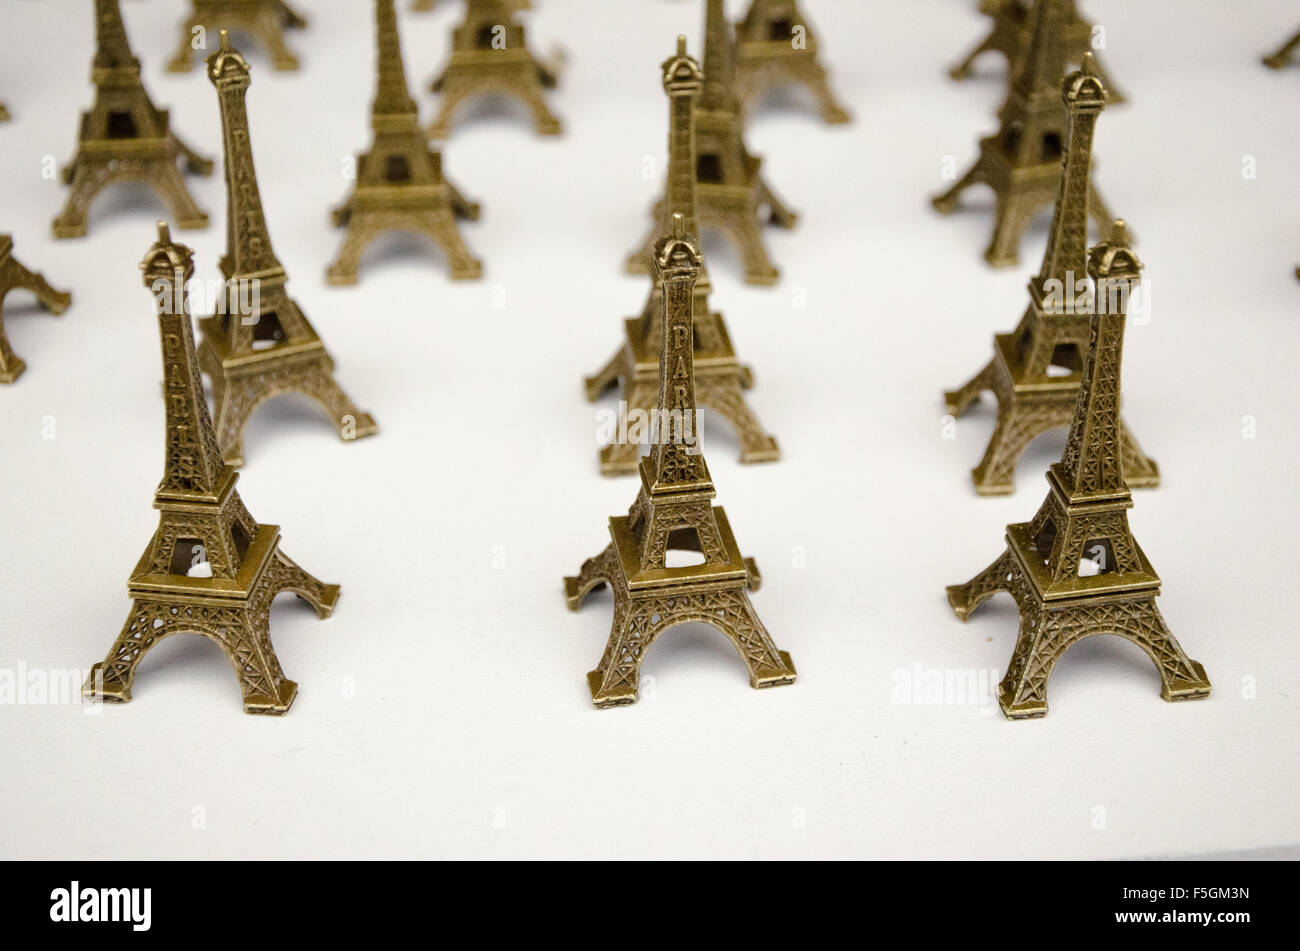 Many Eiffel Tower statues miniatures Stock Photo